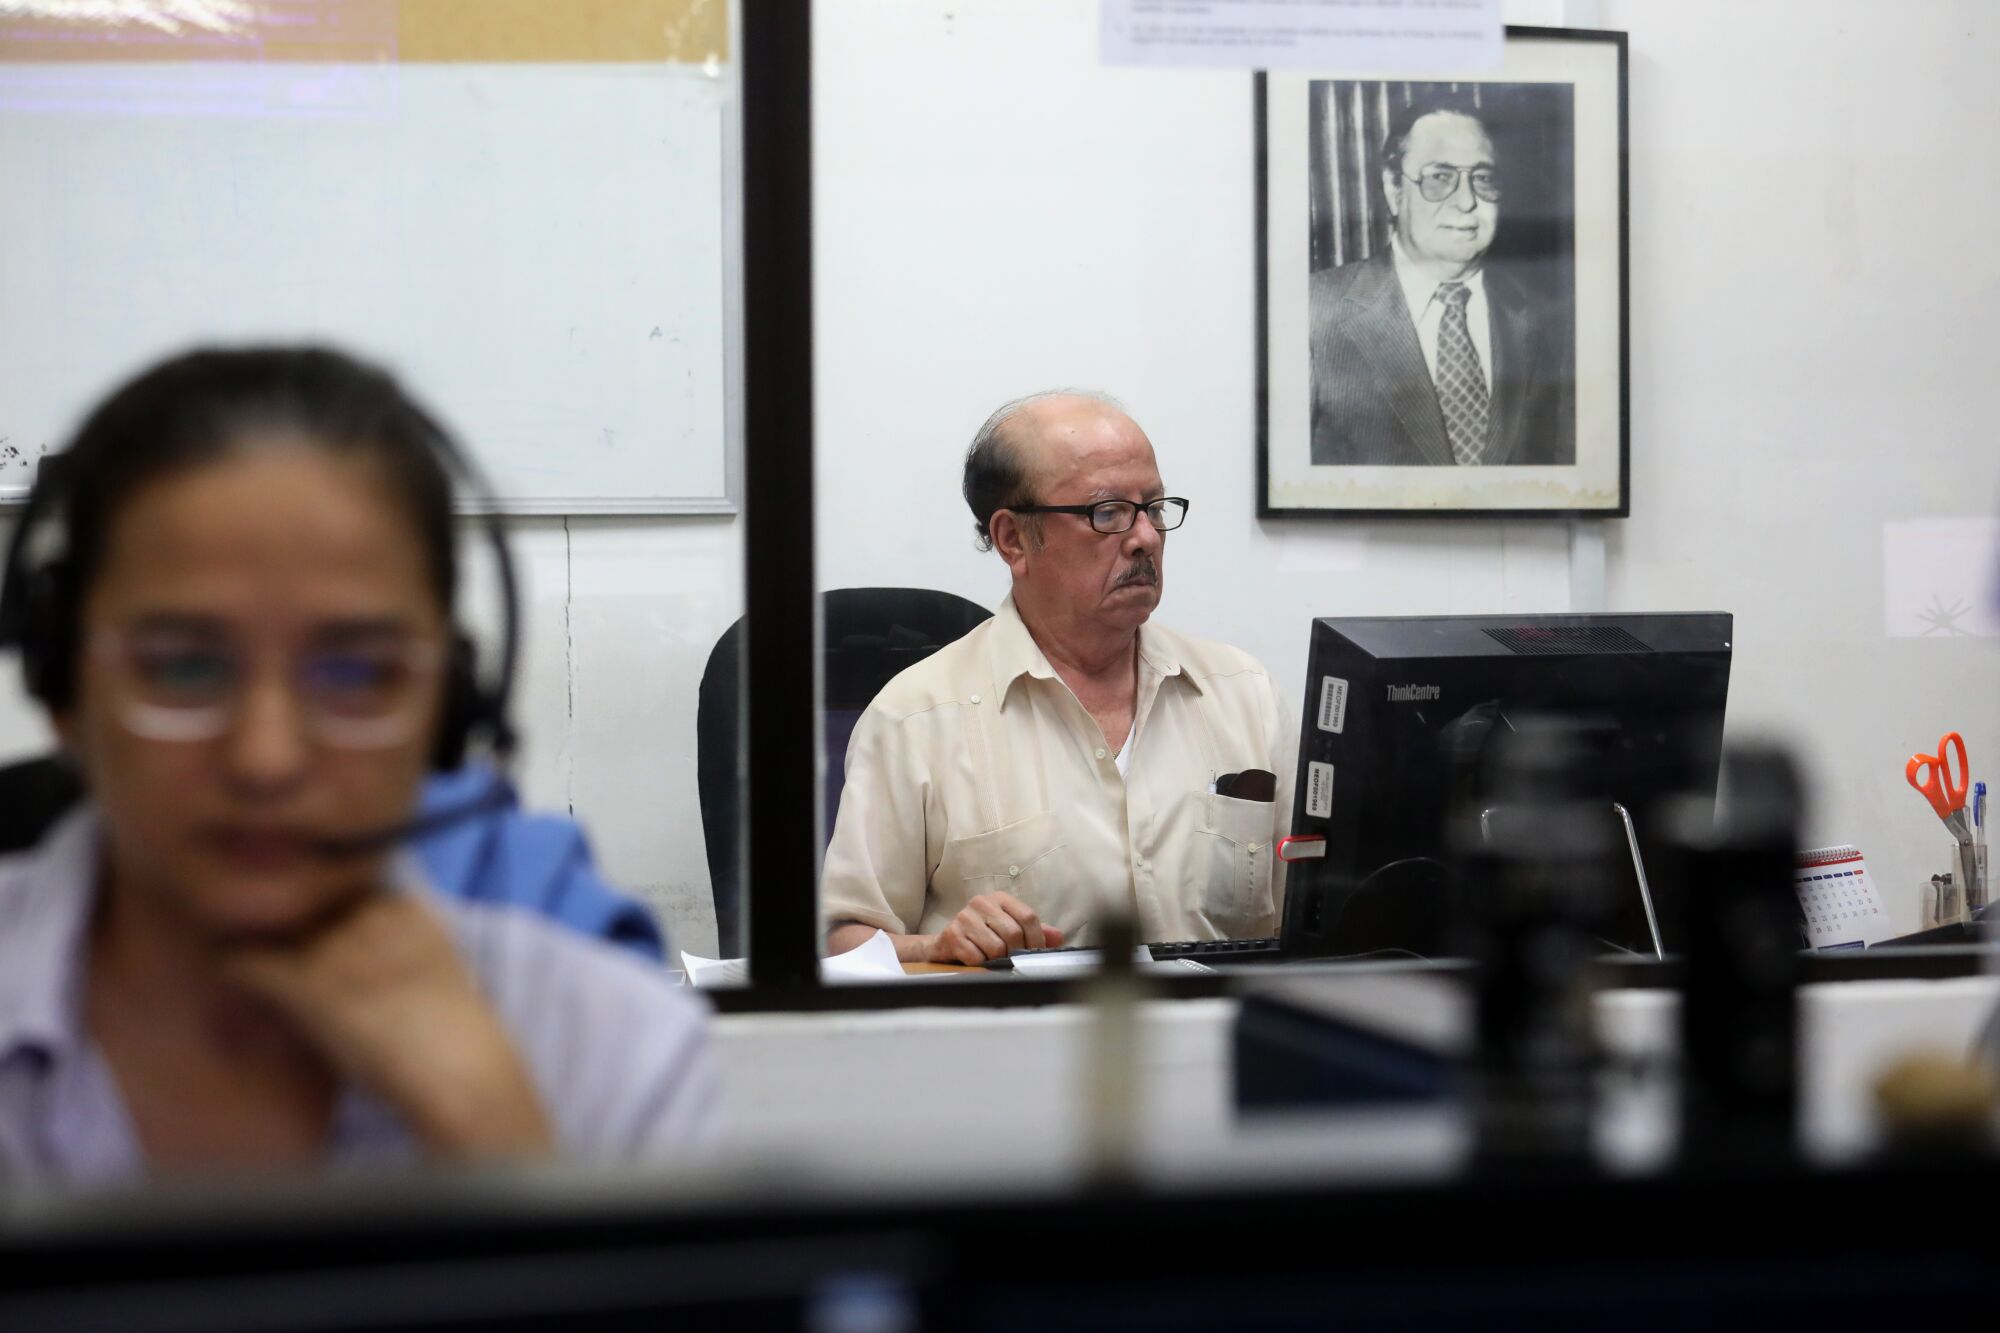 Editorial page editor Luis Sánchez Sancho at work. Behind him is a portrait of Pedro Joaquín Chamorro, the longtime publisher of La Prensa who was killed in 1978.